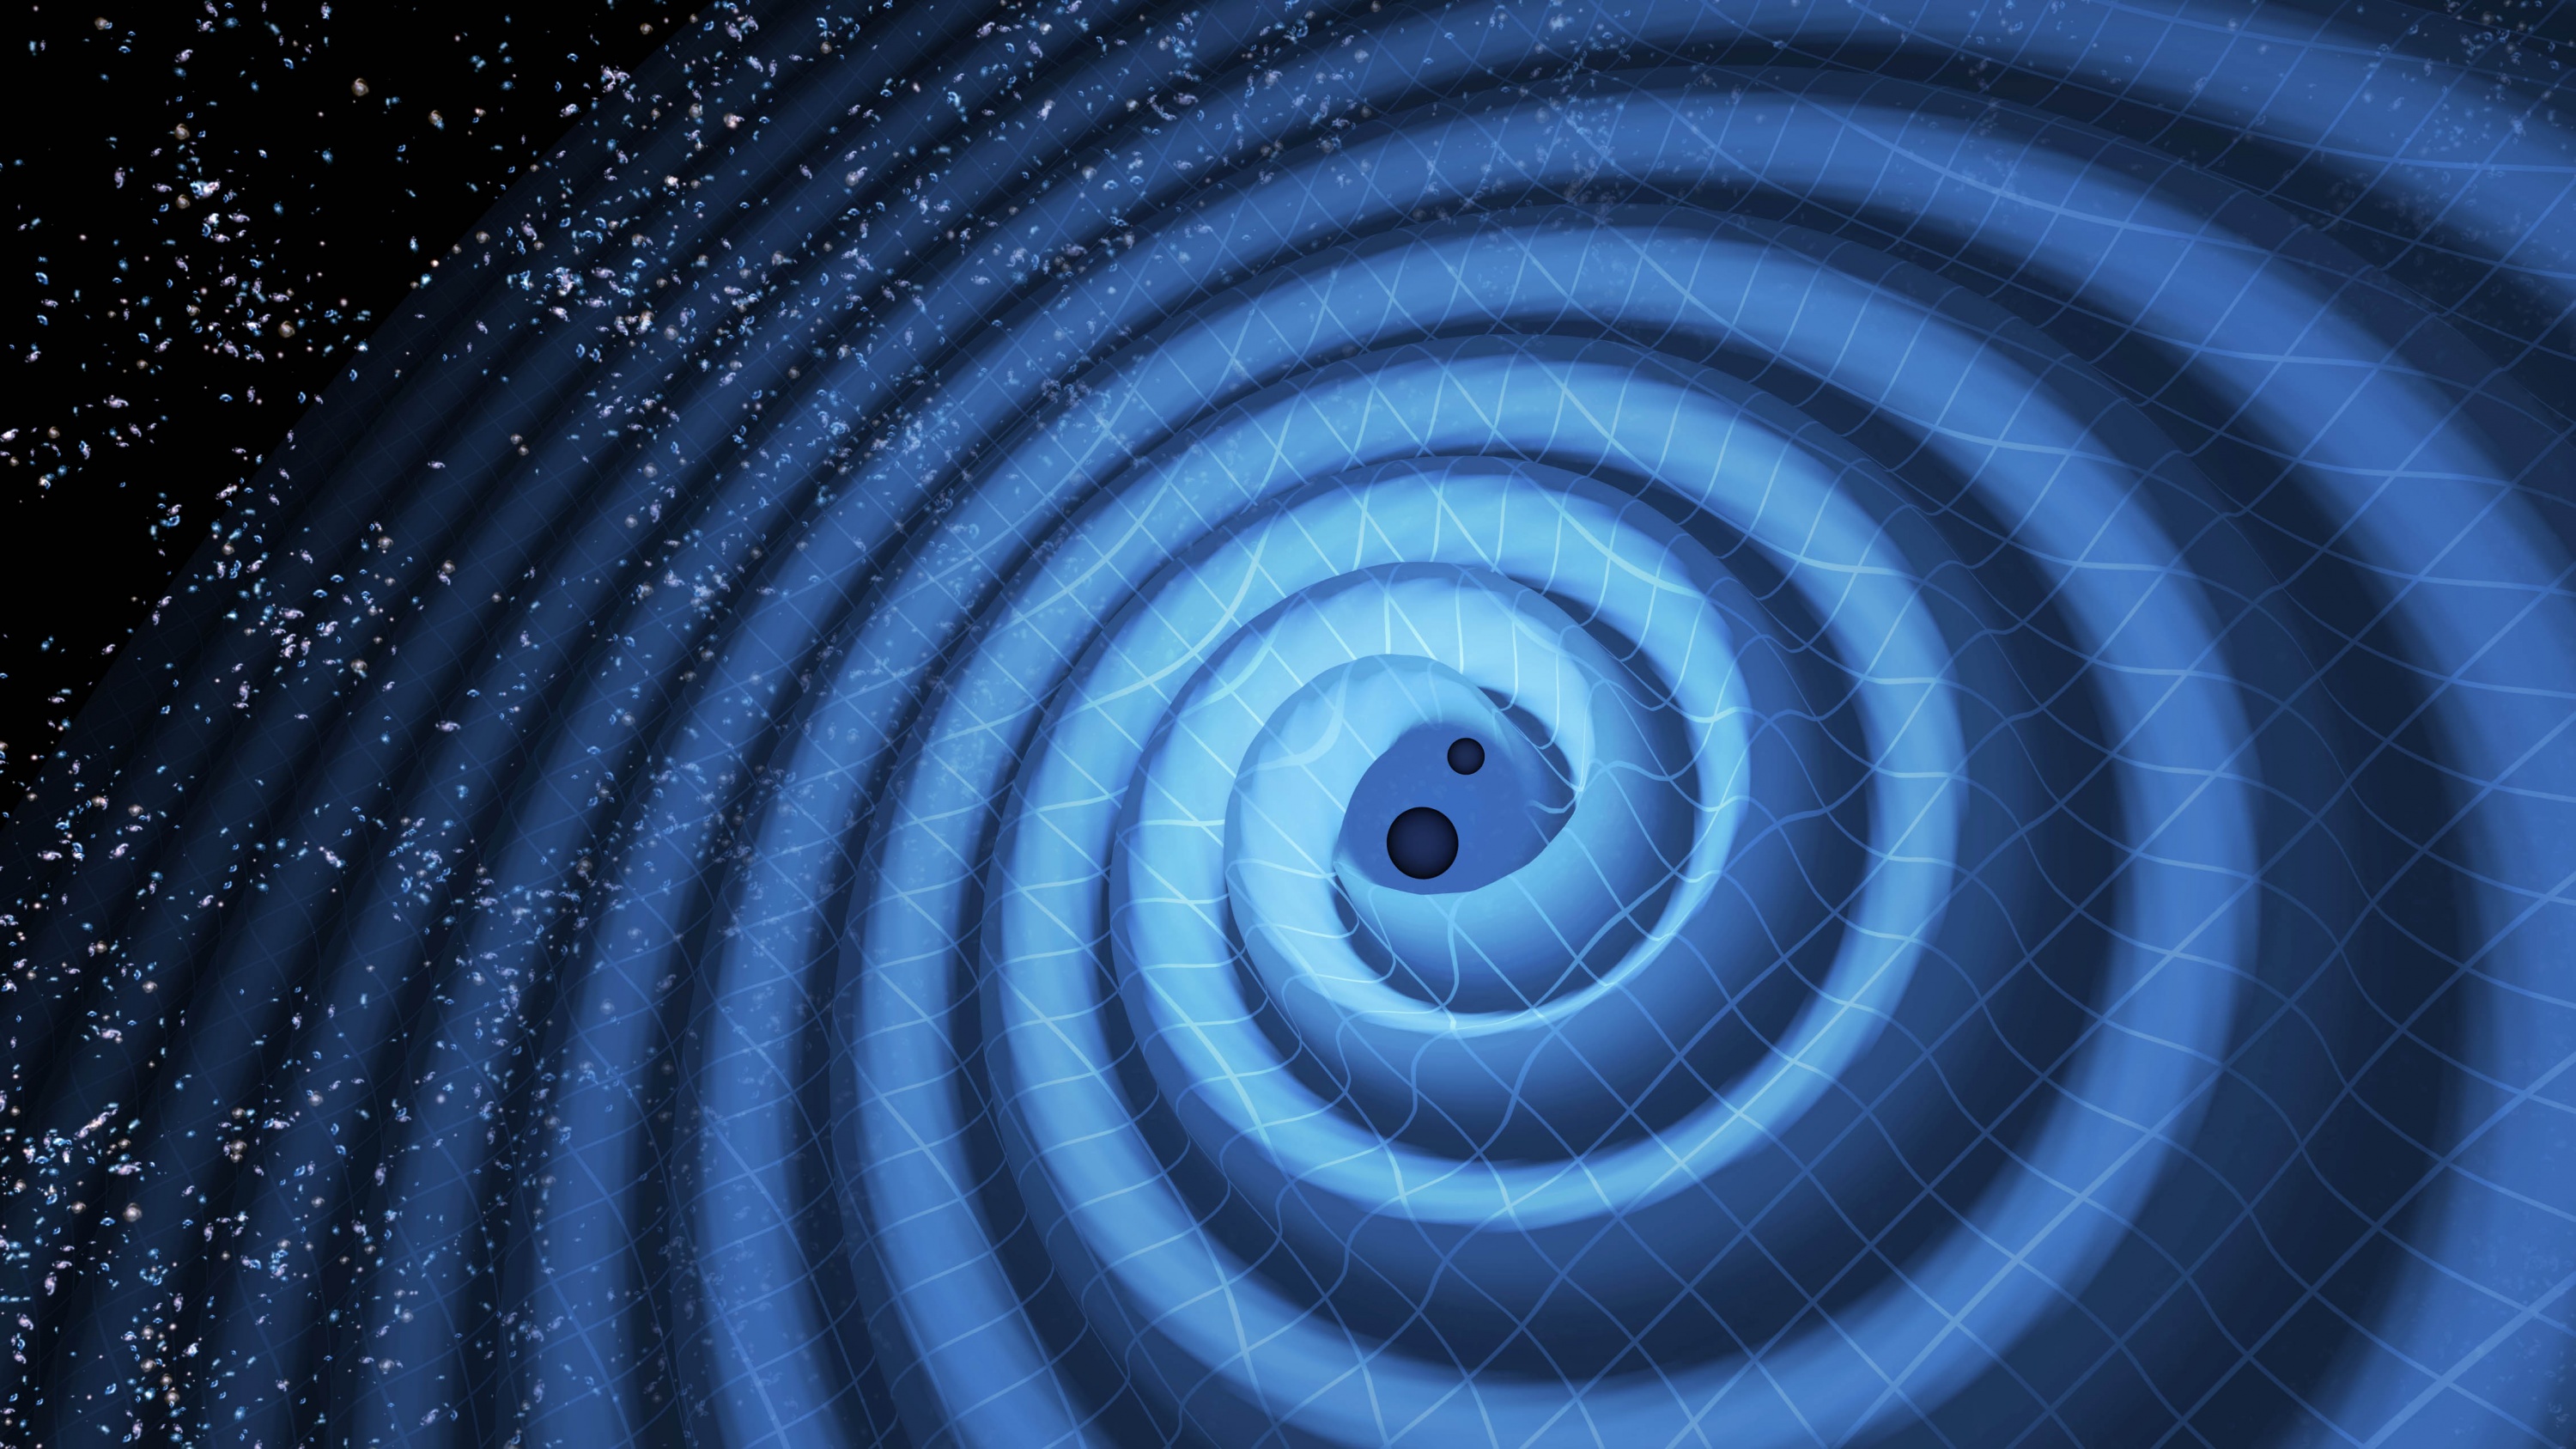 This illustration shows the merger of two black holes and the gravitational waves that ripple outward as the black holes spiral toward each other. The black holes—which represent those detected by LIGO on Dec. 26, 2015—were 14 and 8 times the mass of the sun, until they merged, forming a single black hole 21 times the mass of the sun. In reality, the area near the black holes would appear highly warped, and the gravitational waves would be difficult to see directly. Image credit: LIGO/T. Pyle